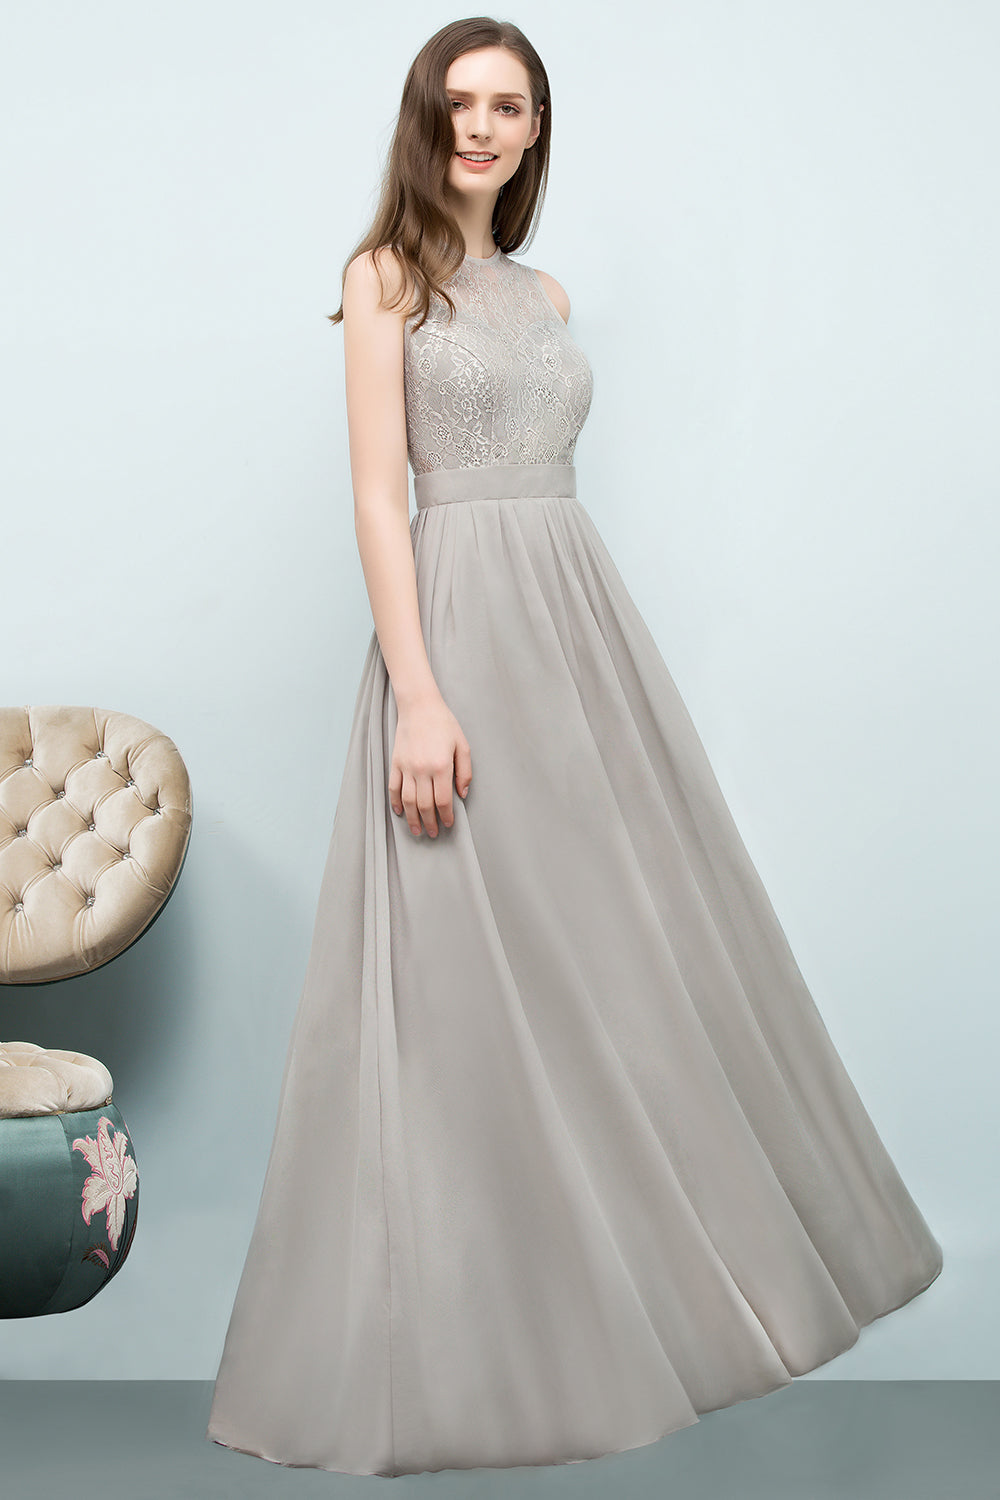 Load image into Gallery viewer, Affordable Lace Sleeveless Silver Bridesmaid Dress with Ruffles-27dress
